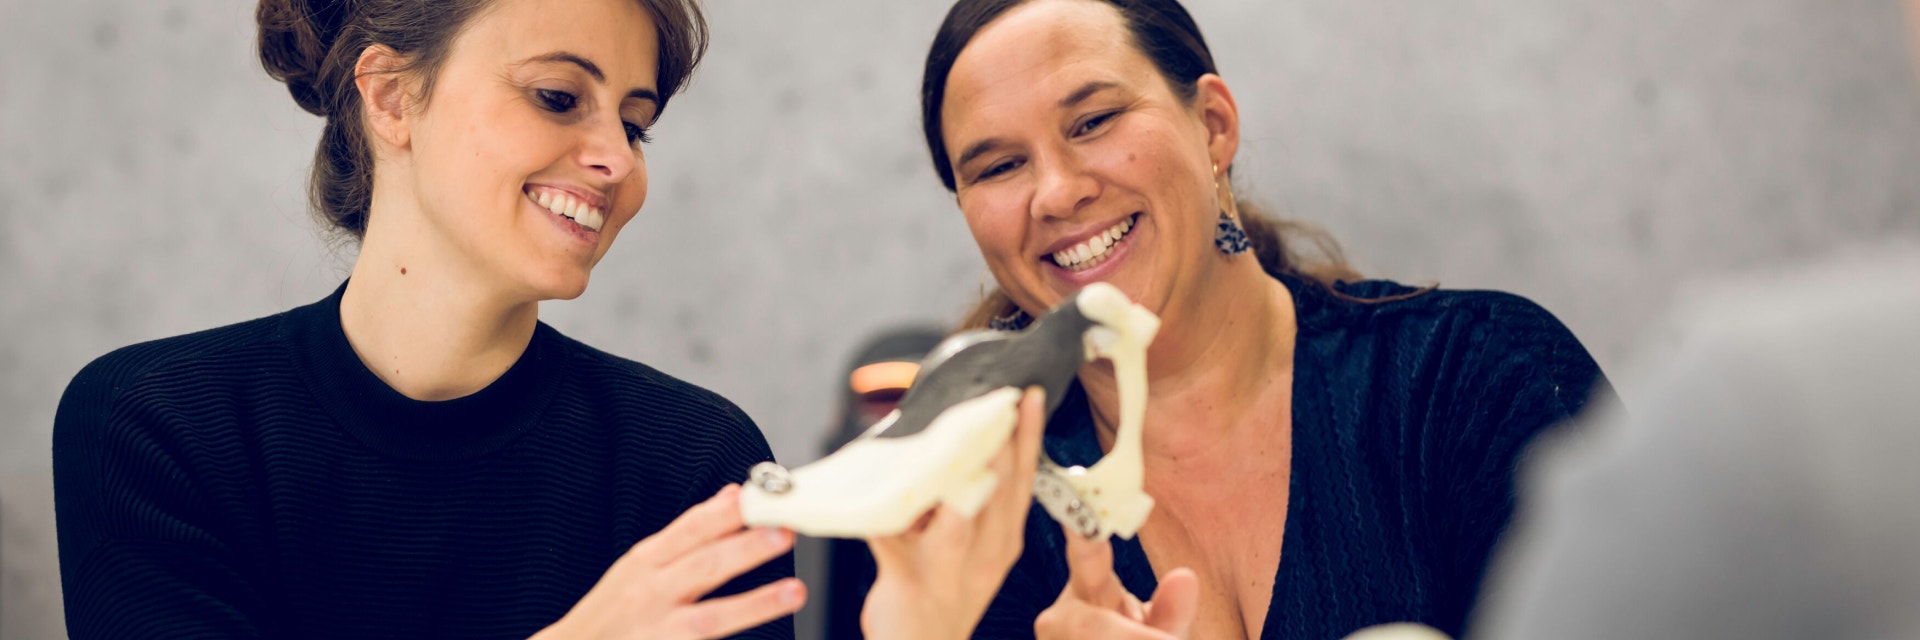 Two women smiling and looking at a 3D-printed part